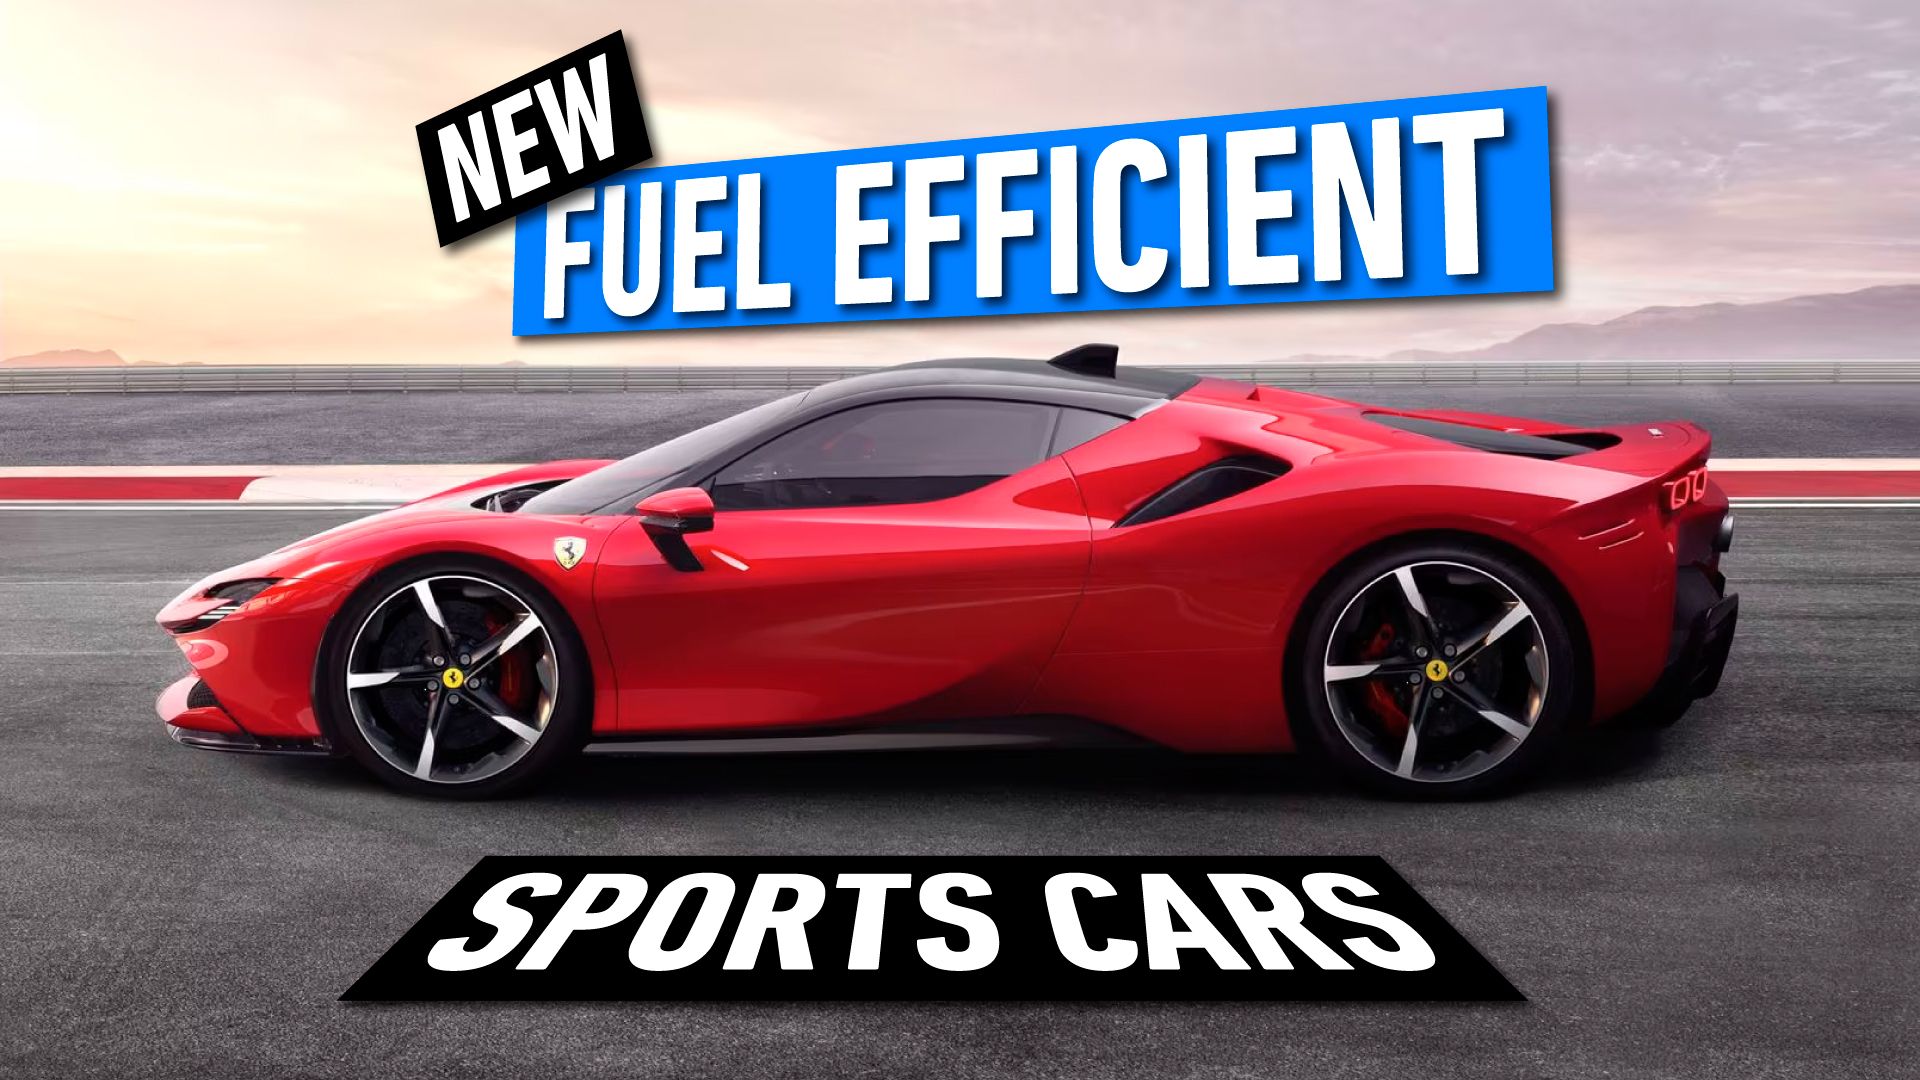 10 New Sports Cars That Are More Fuel Efficient Than You’d Expect